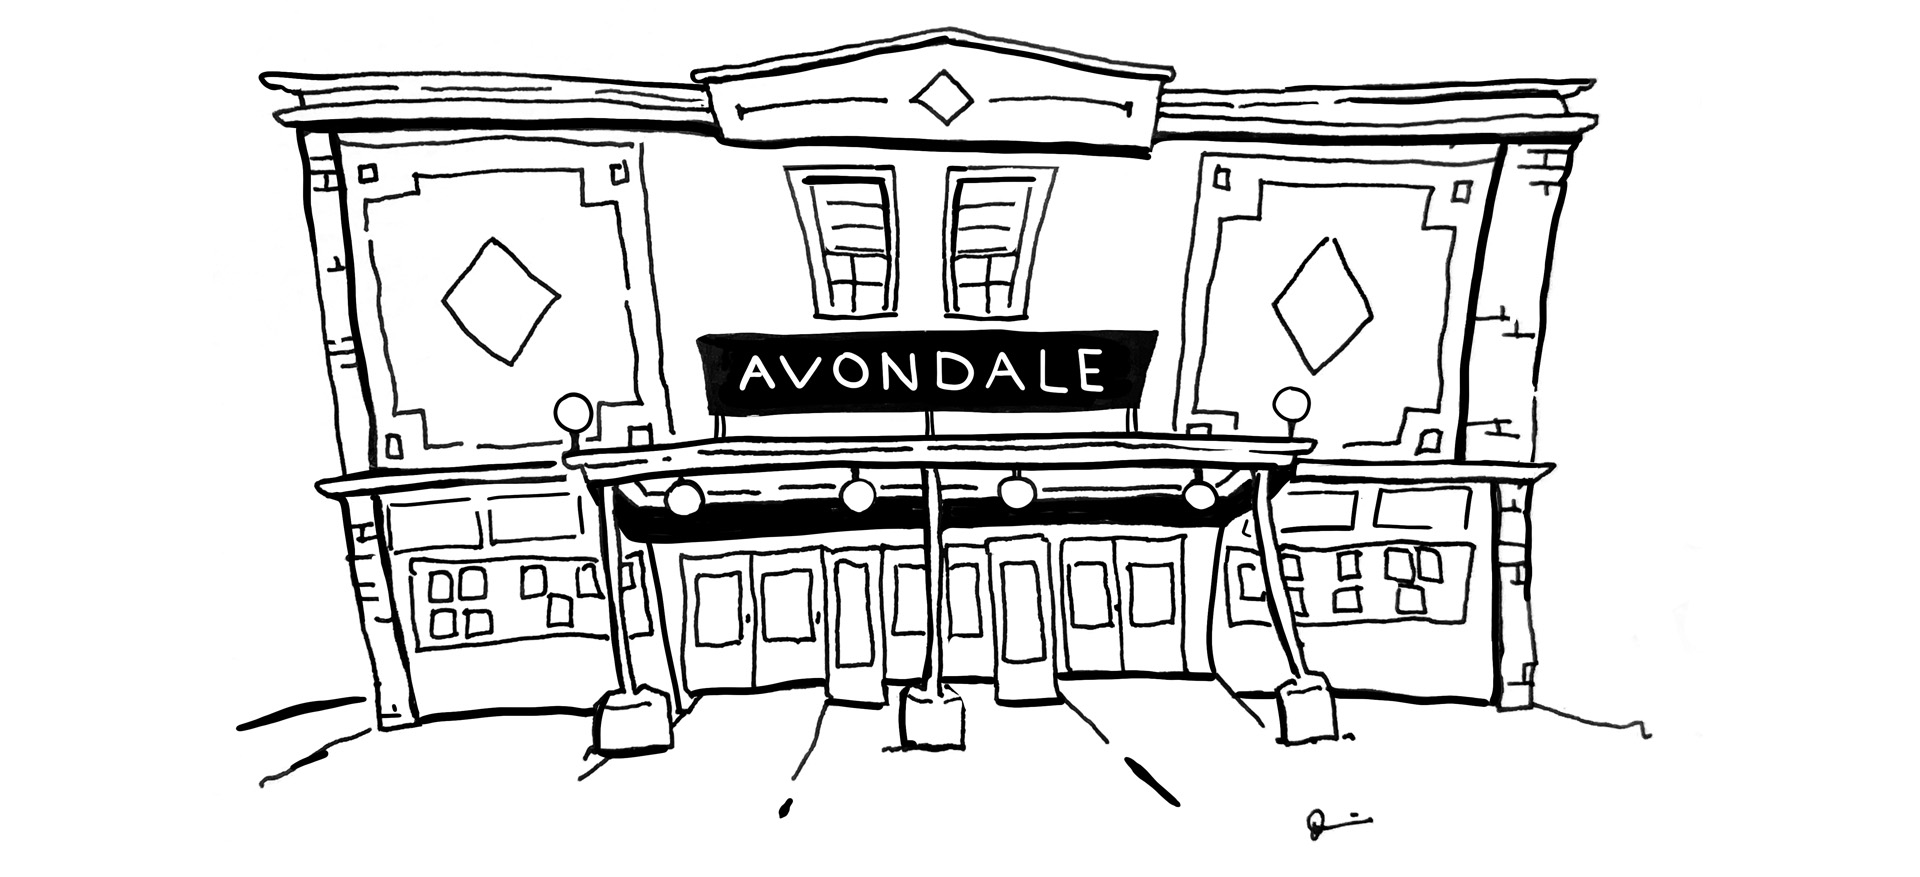 Avondale Theatre as it appeared in 1924. Sketch by Dennis Reed Jr.